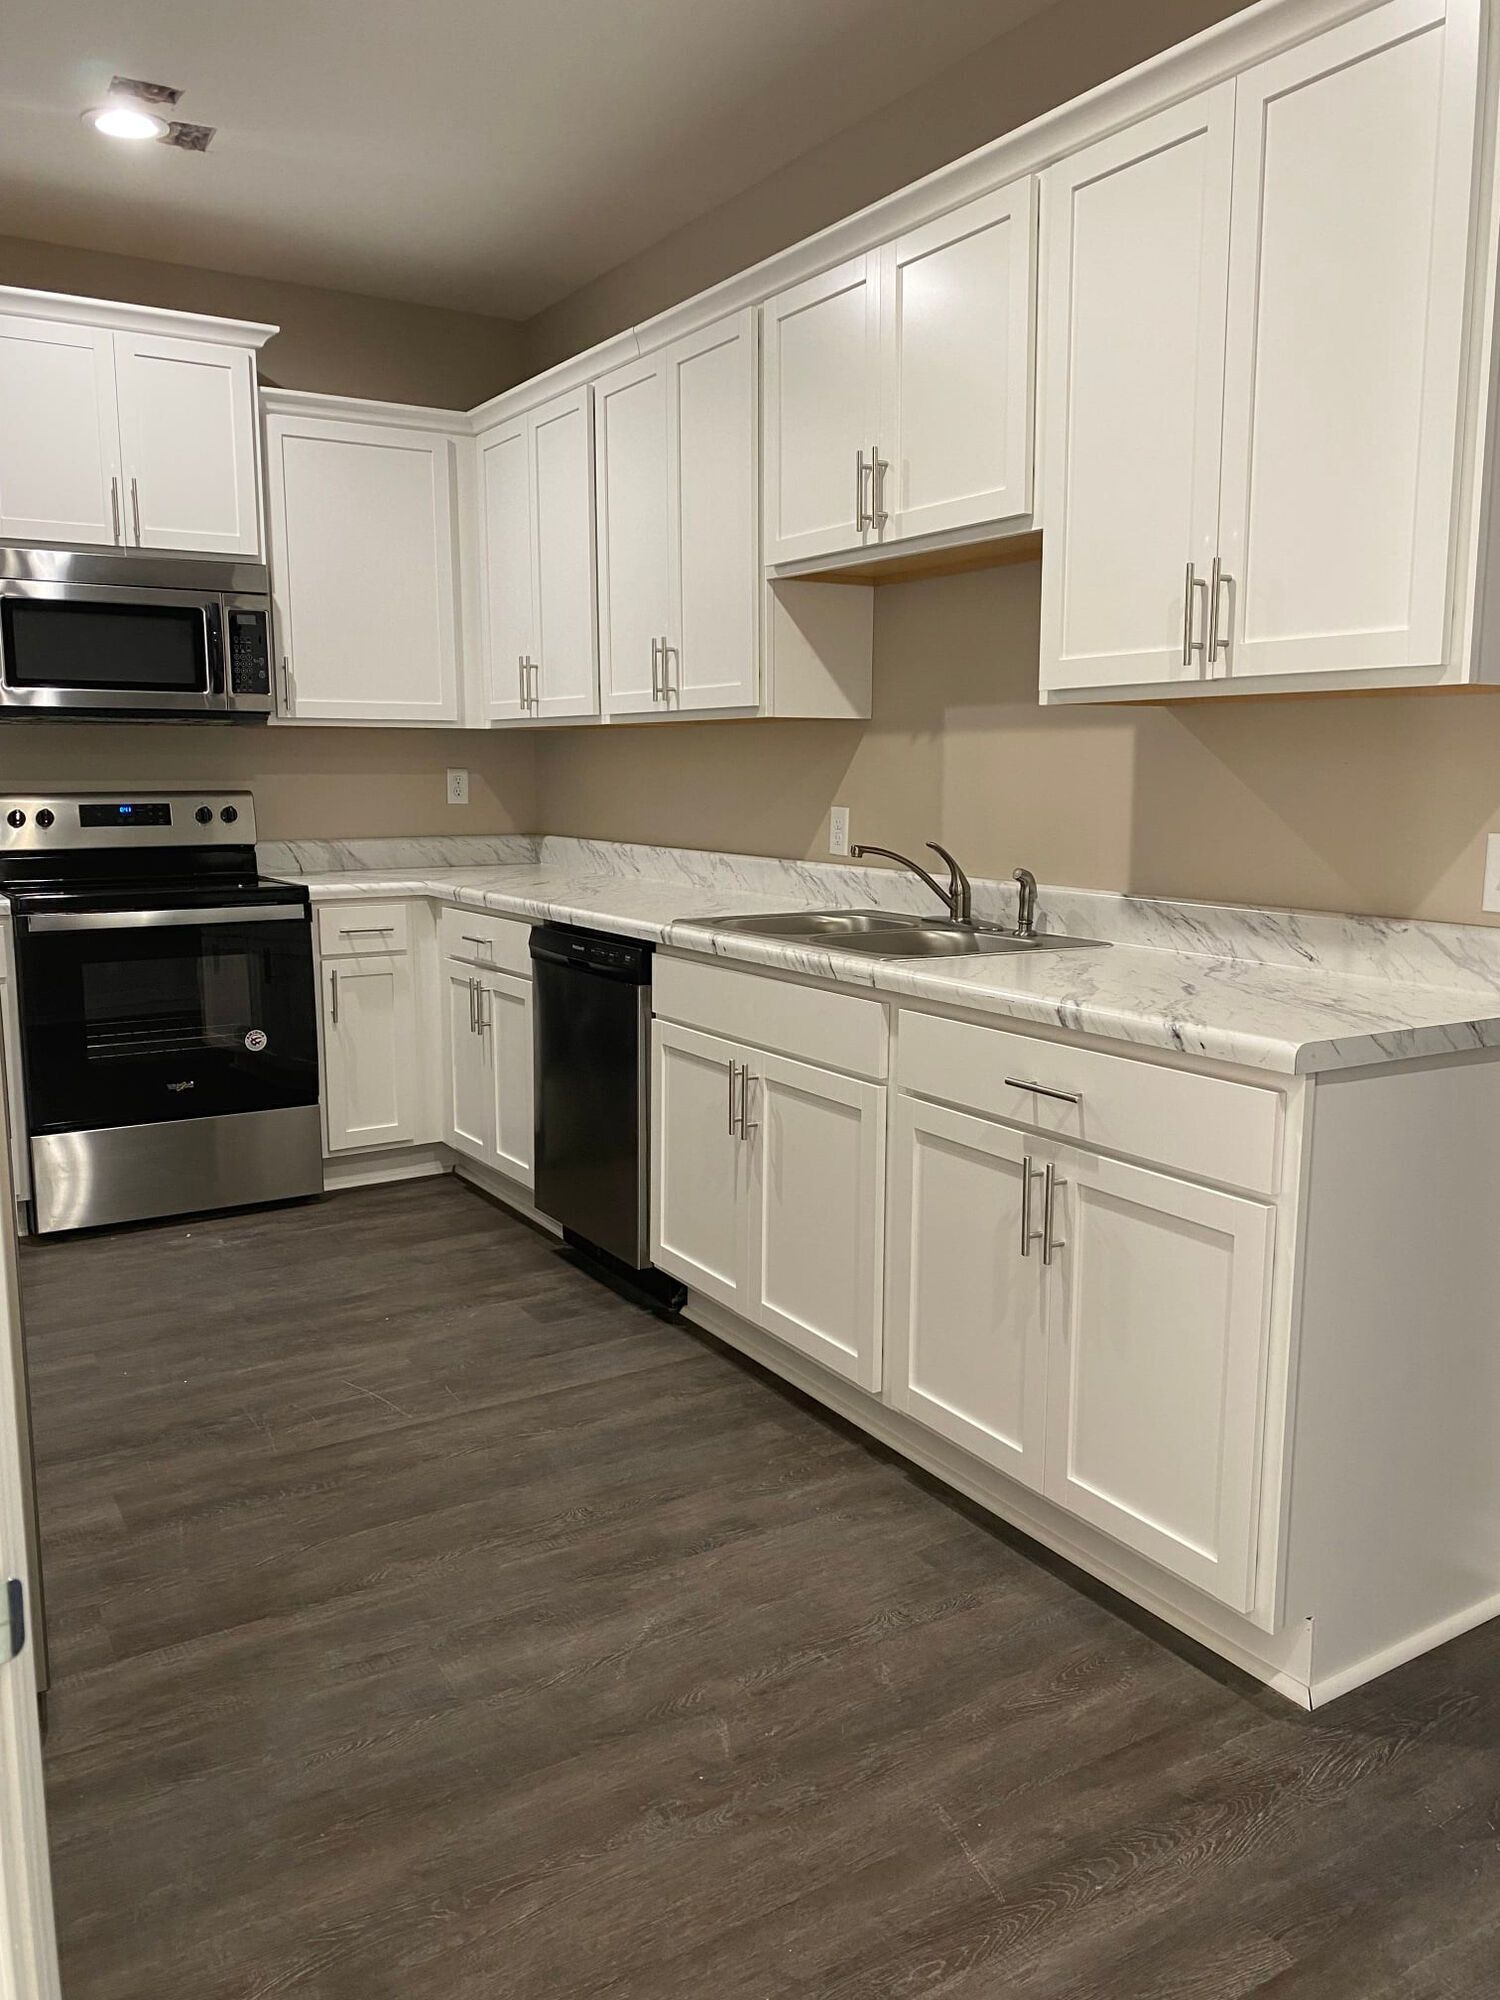 A kitchen with white cabinets and stainless steel appliances at Patriots Place.